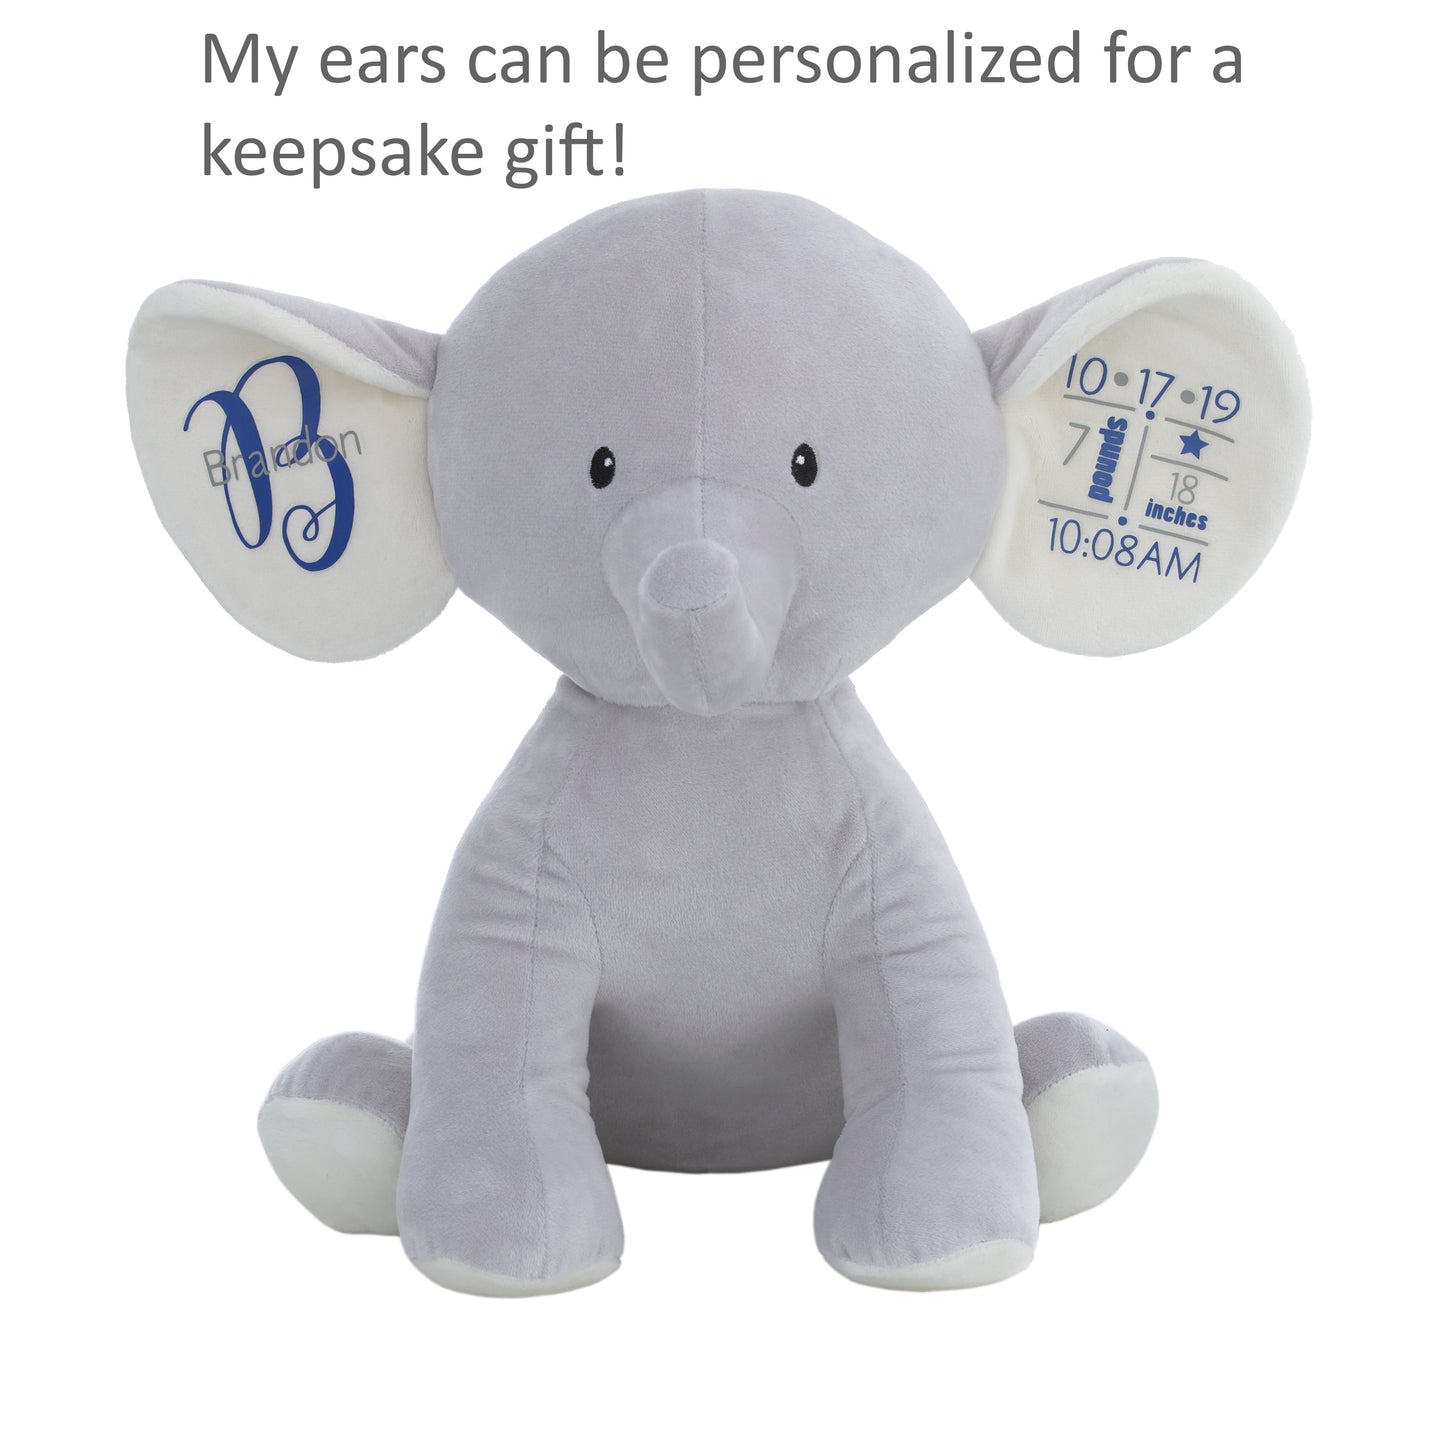 Little Love by NoJo Riley the Elephant Grey and White Super Soft Plush Stuffed Animal with Large Ears